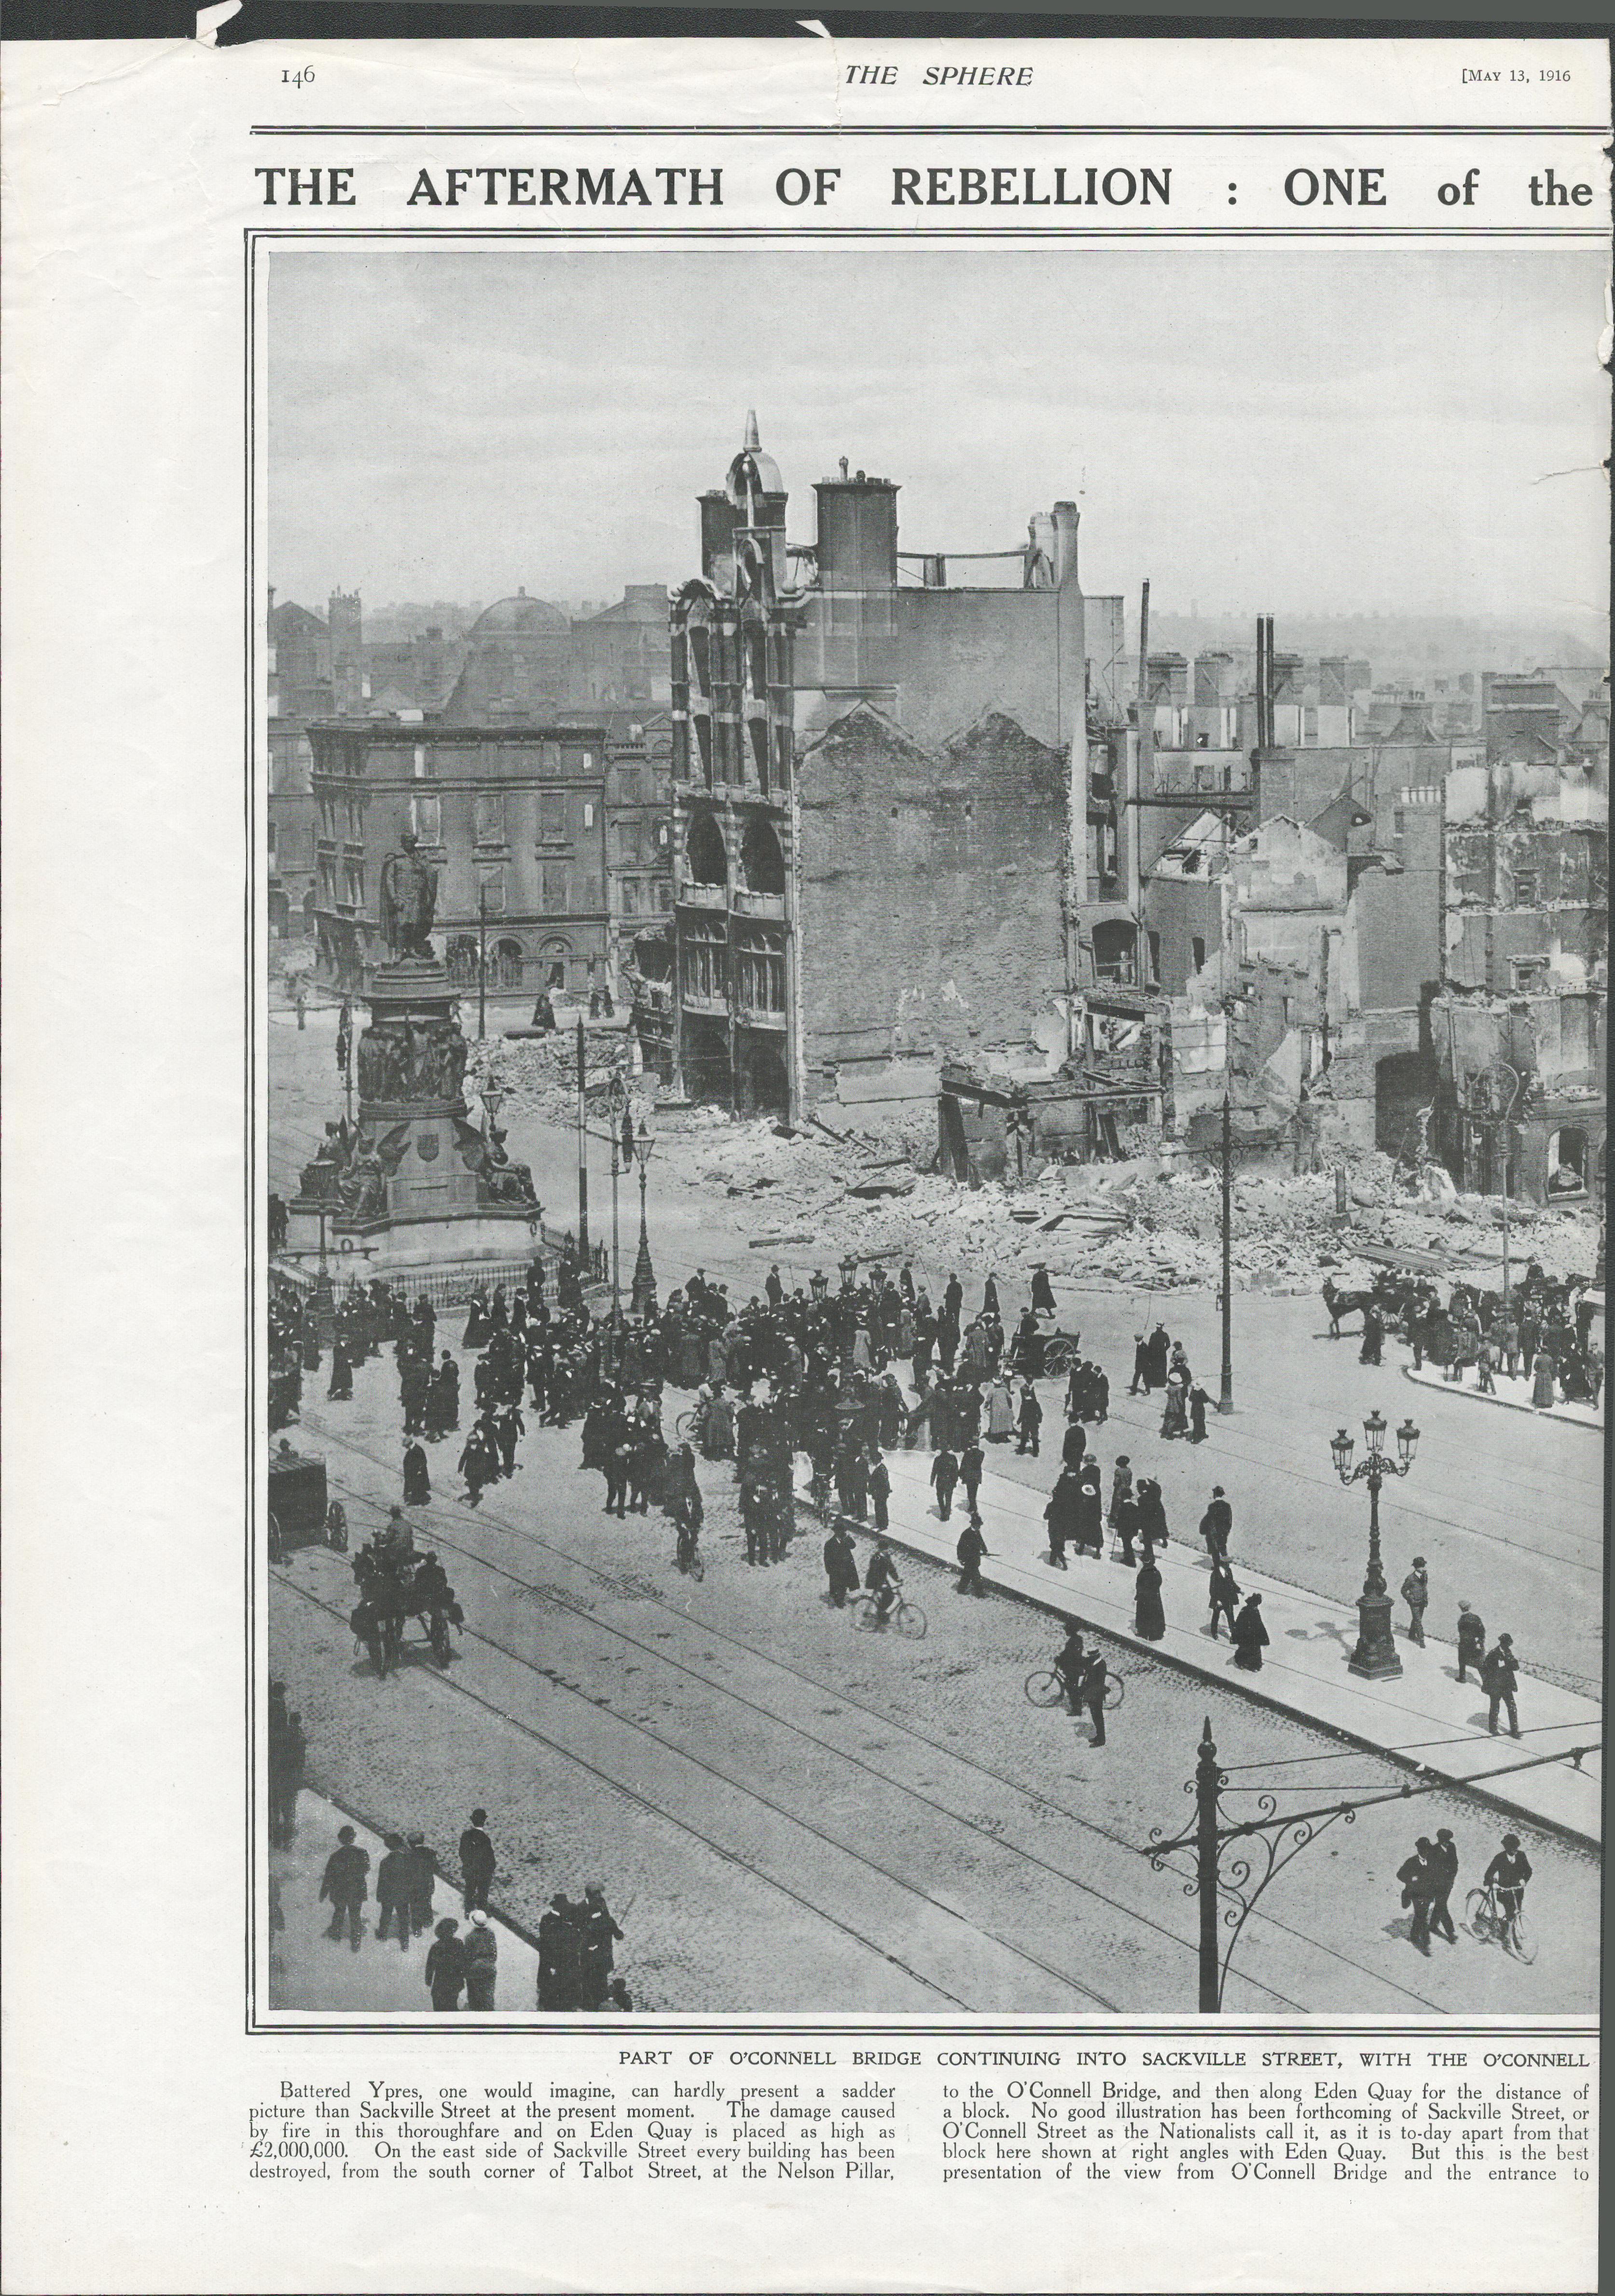 Double Centre Page The Sphere Newspaper The Aftermath of The Easter Rising - Image 2 of 3